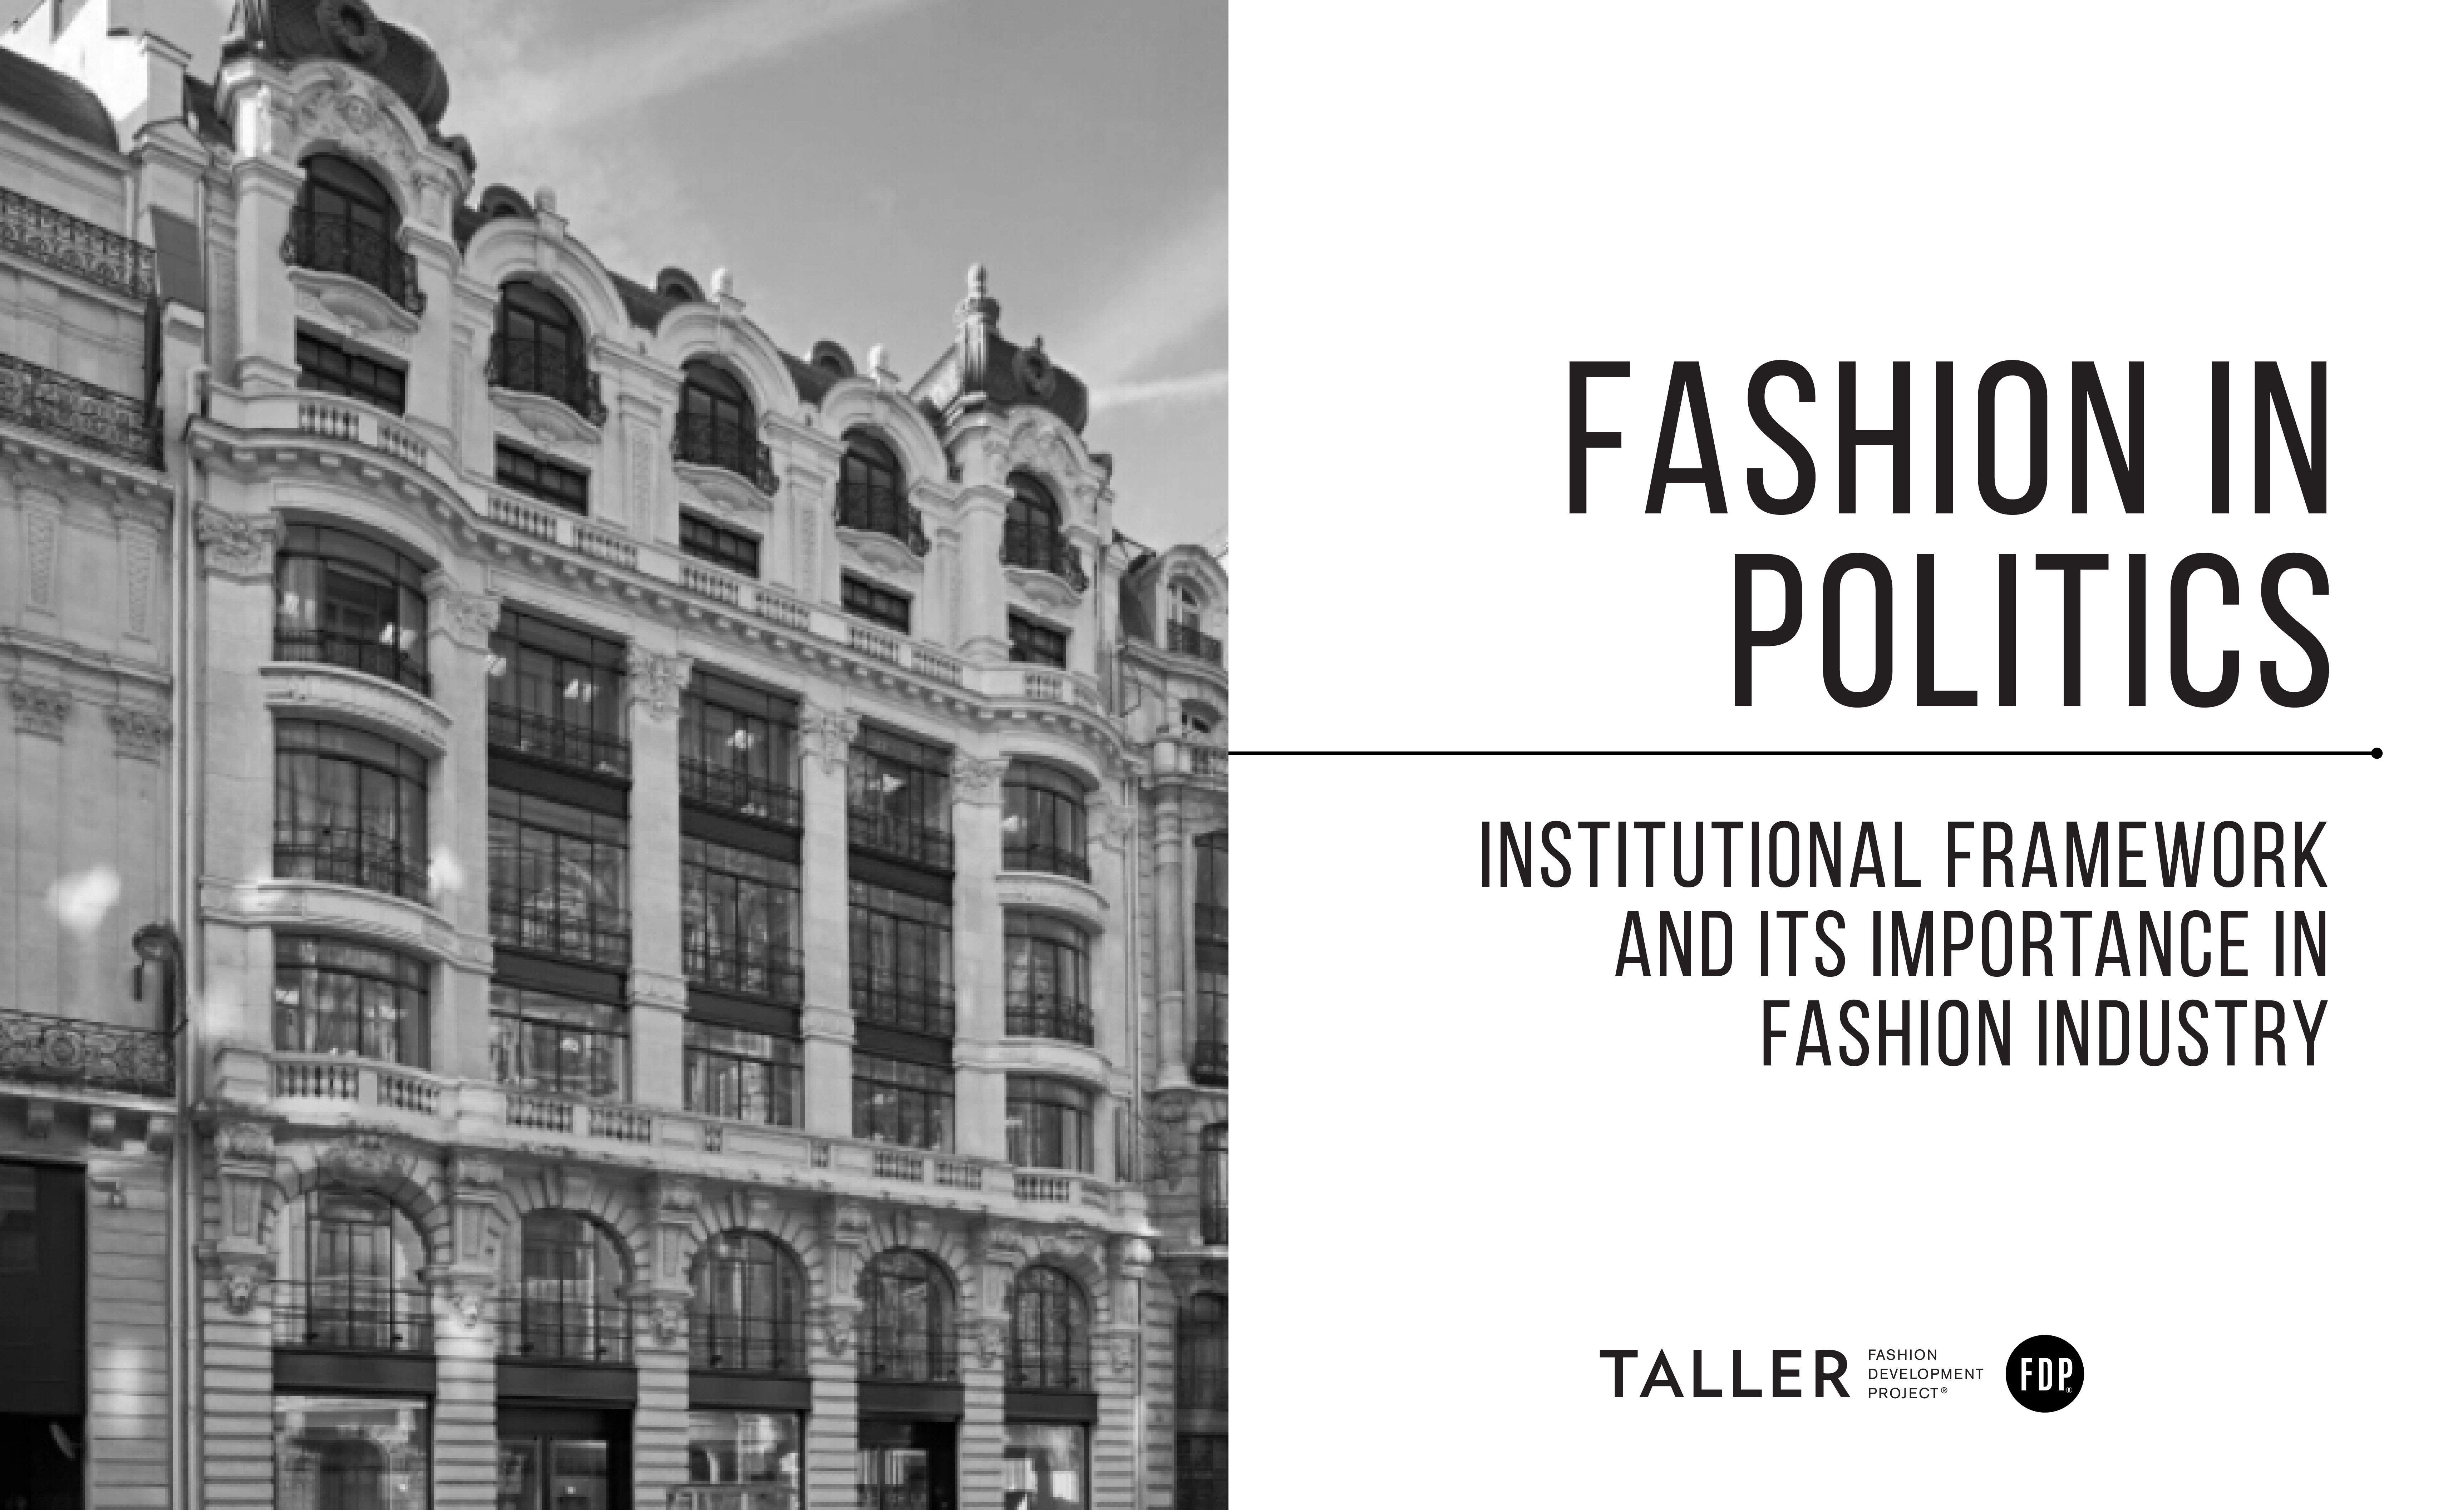 Fashion in Politics: Institutional framework and its importance in fashion industry.